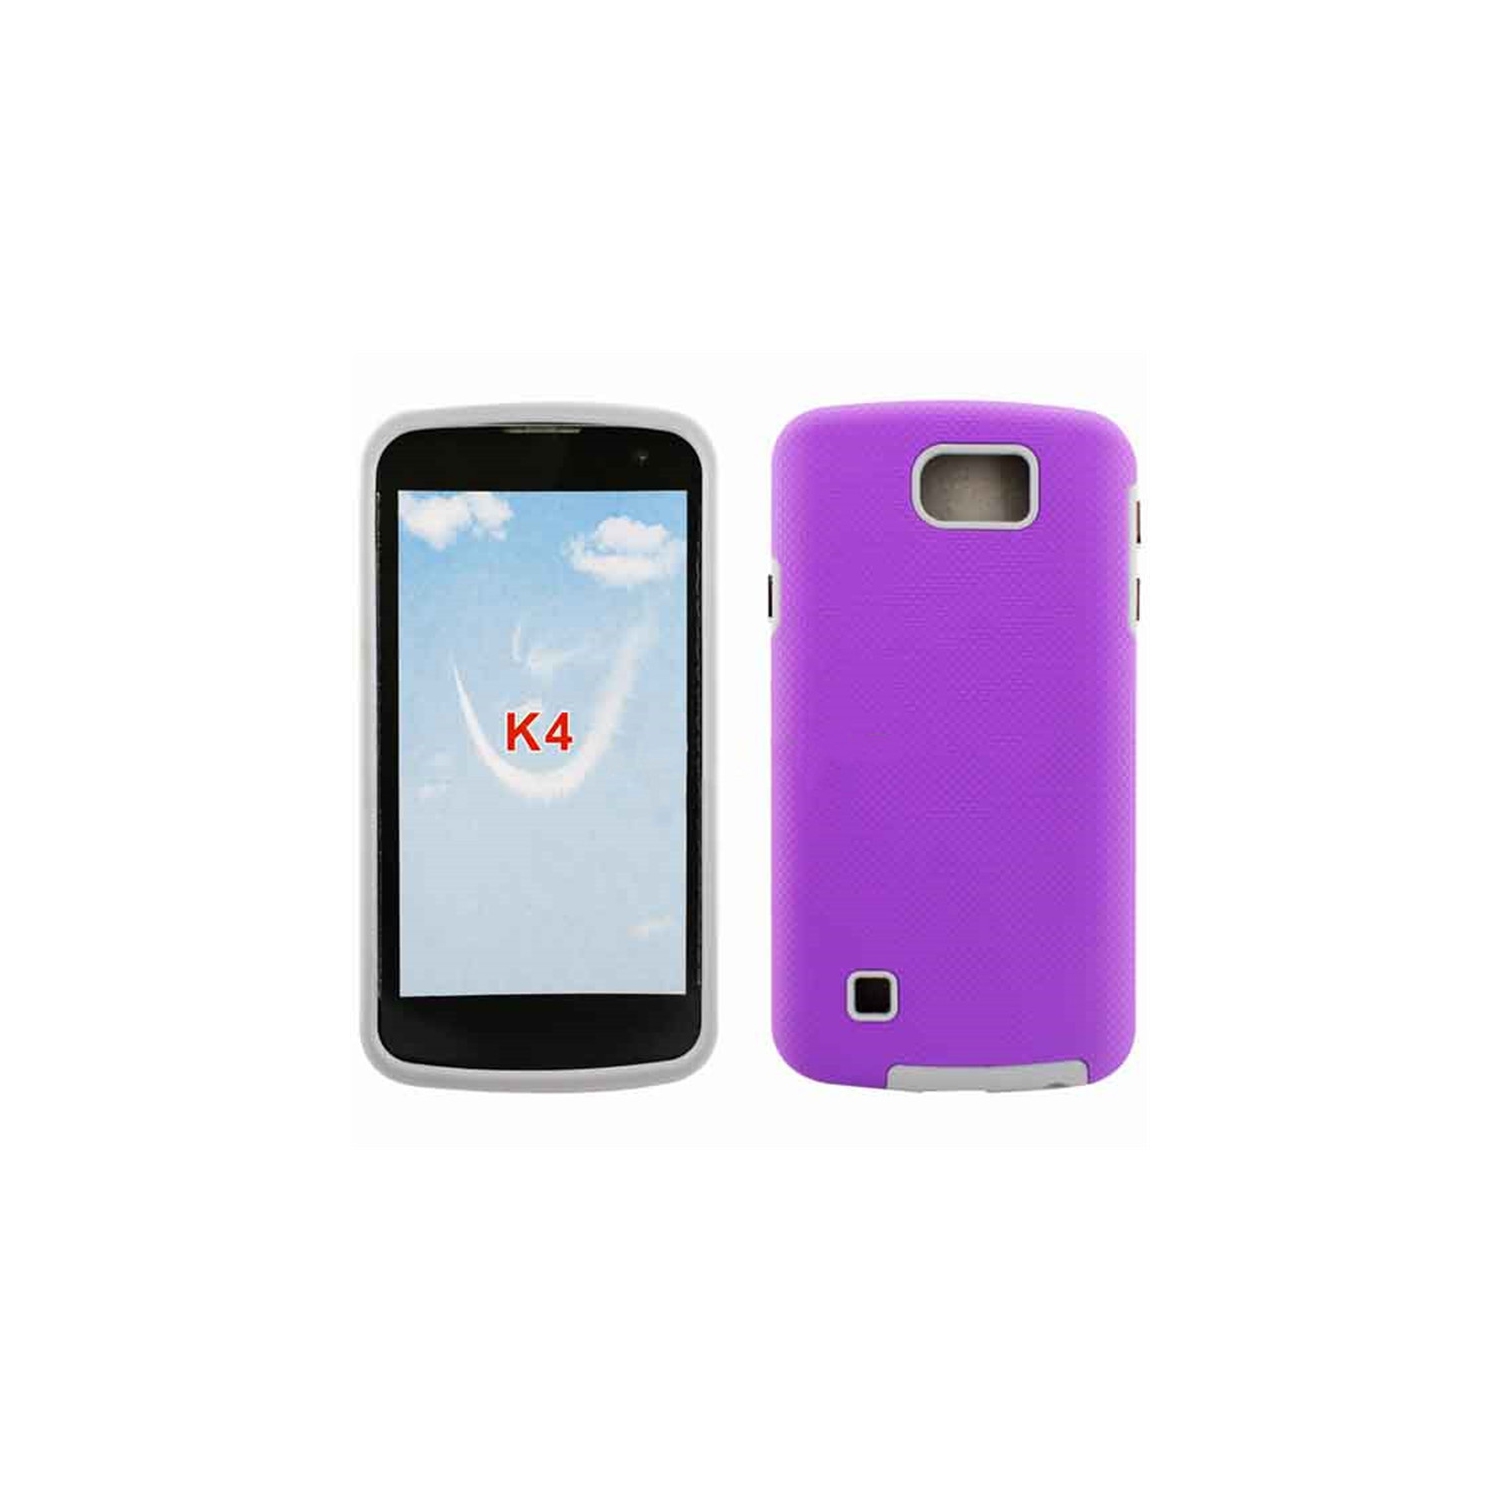 【CSmart】 Slim Fitted Hybrid Hard PC Shell Shockproof Scratch Resistant Case Cover for LG K4 2016, Purple